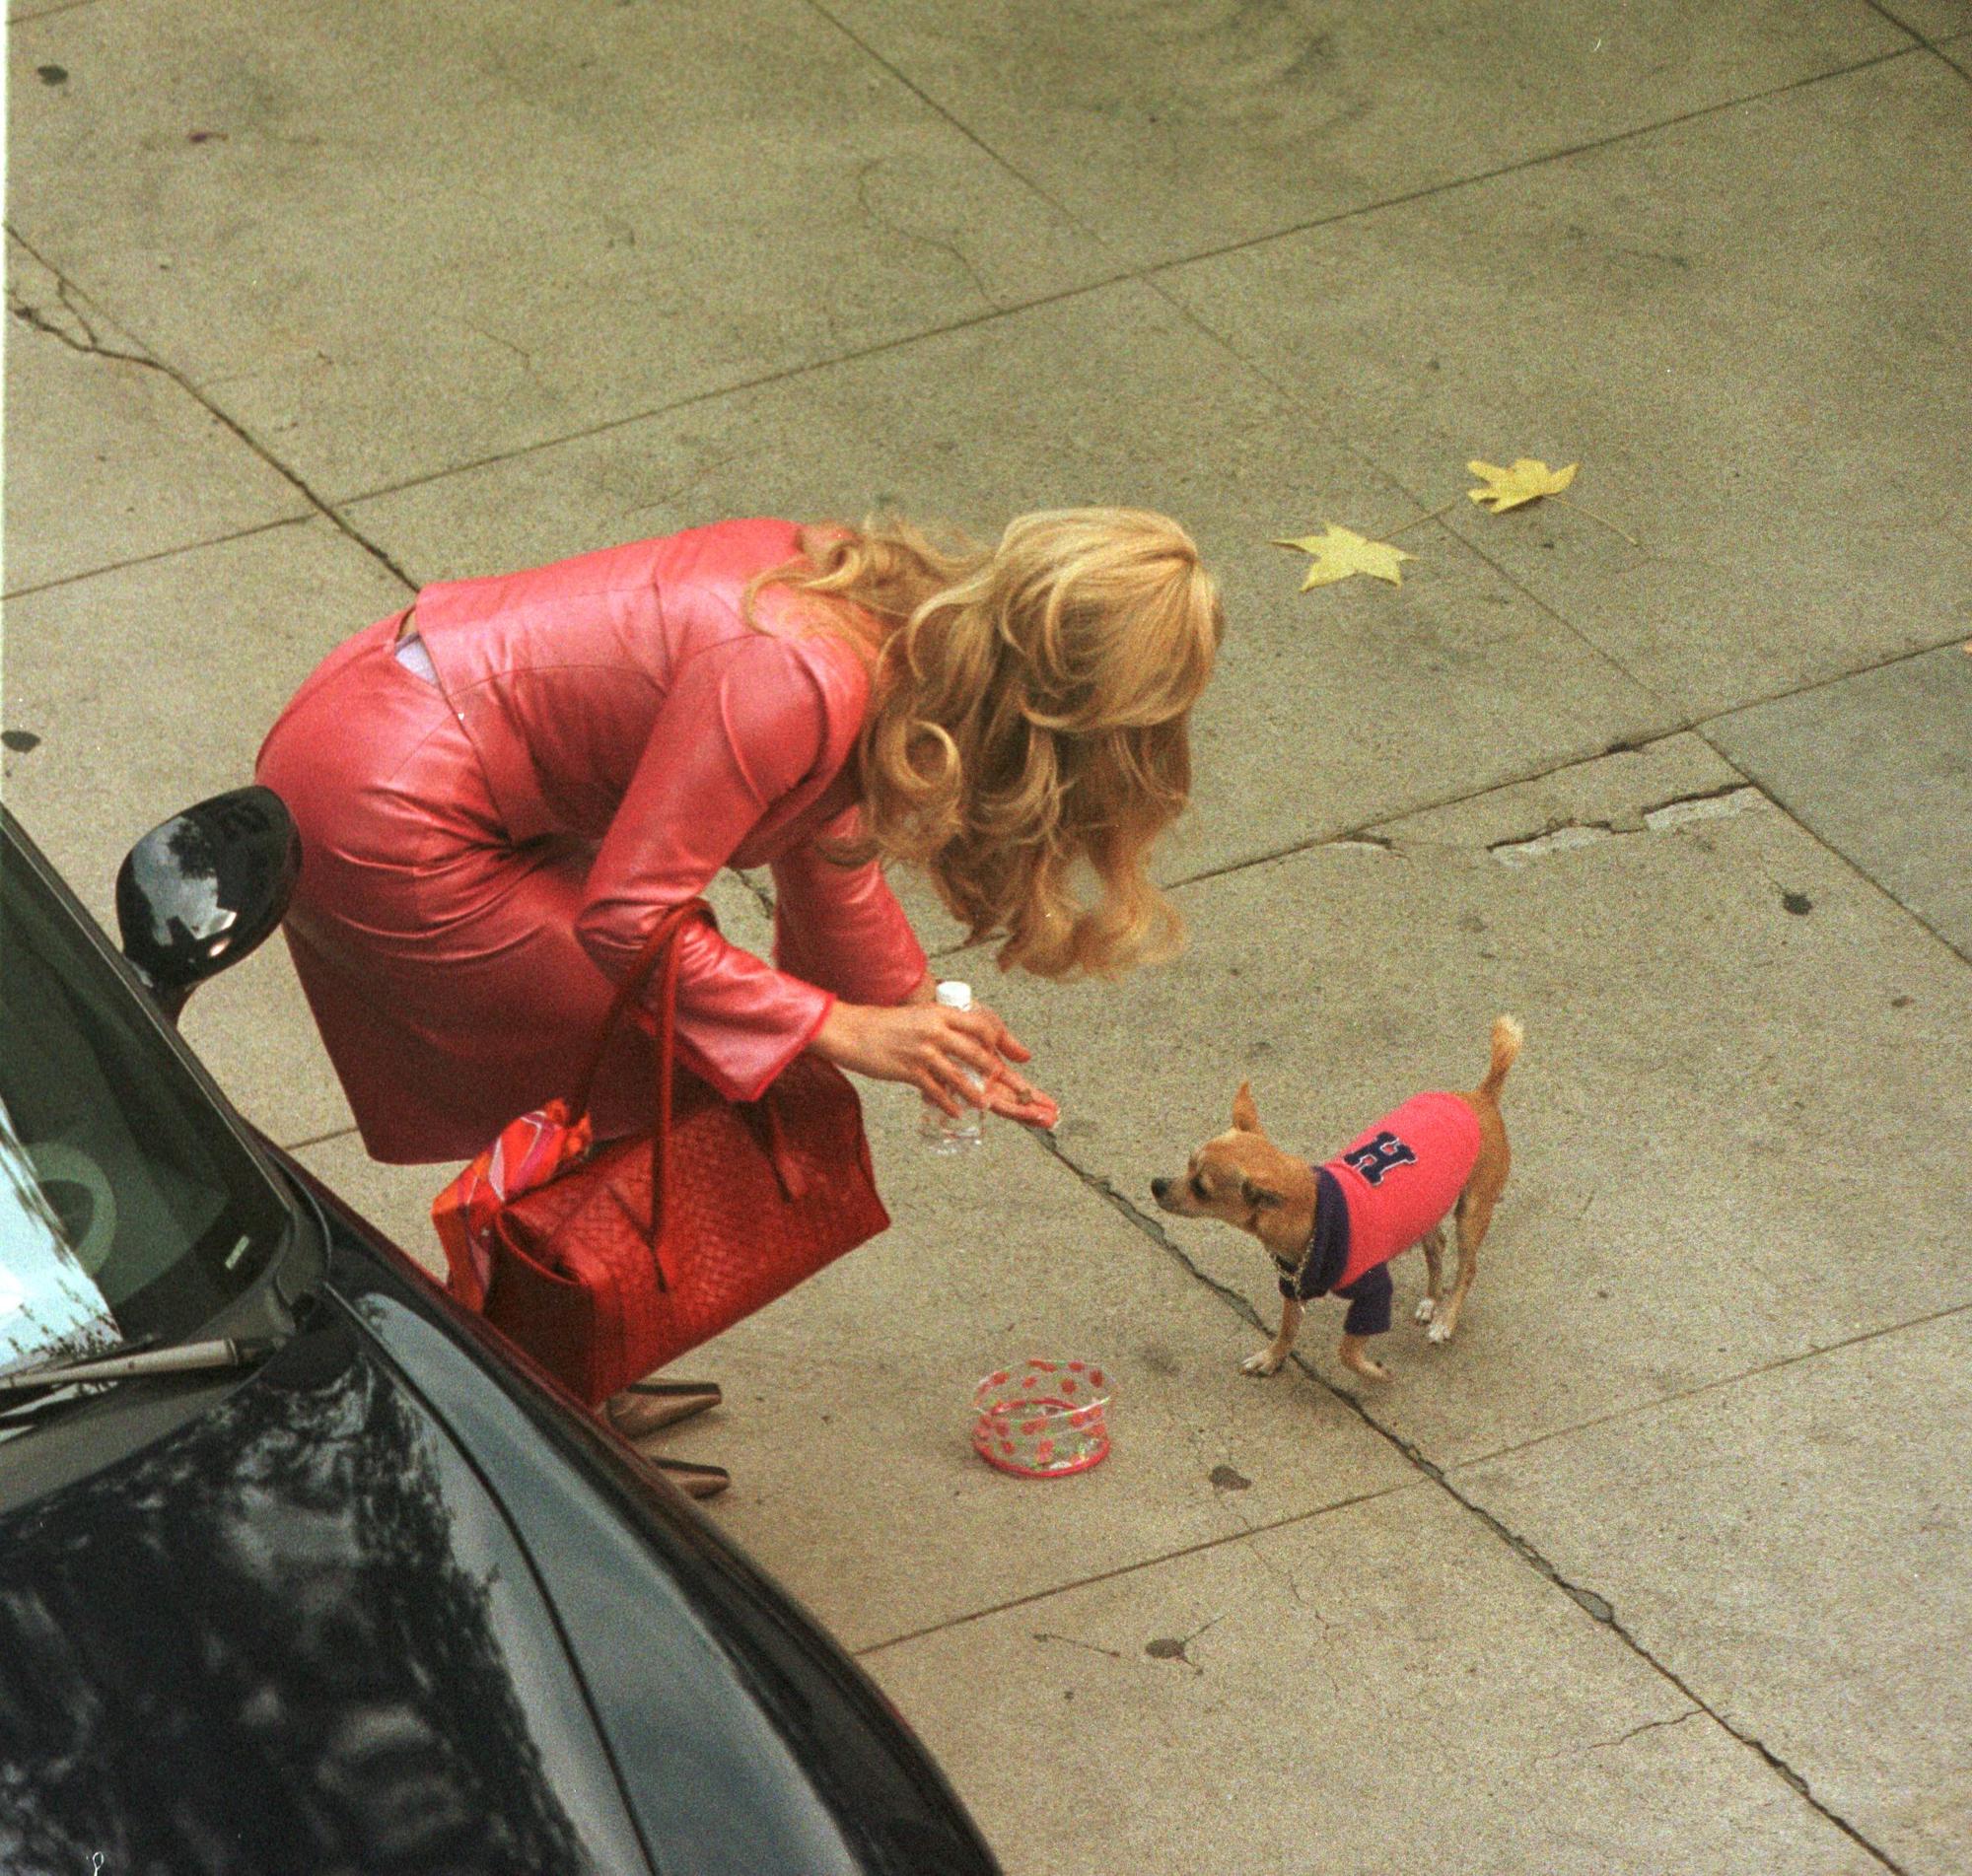 Reese Witherspoon in 'Legally Blonde' bending down to pet a dog